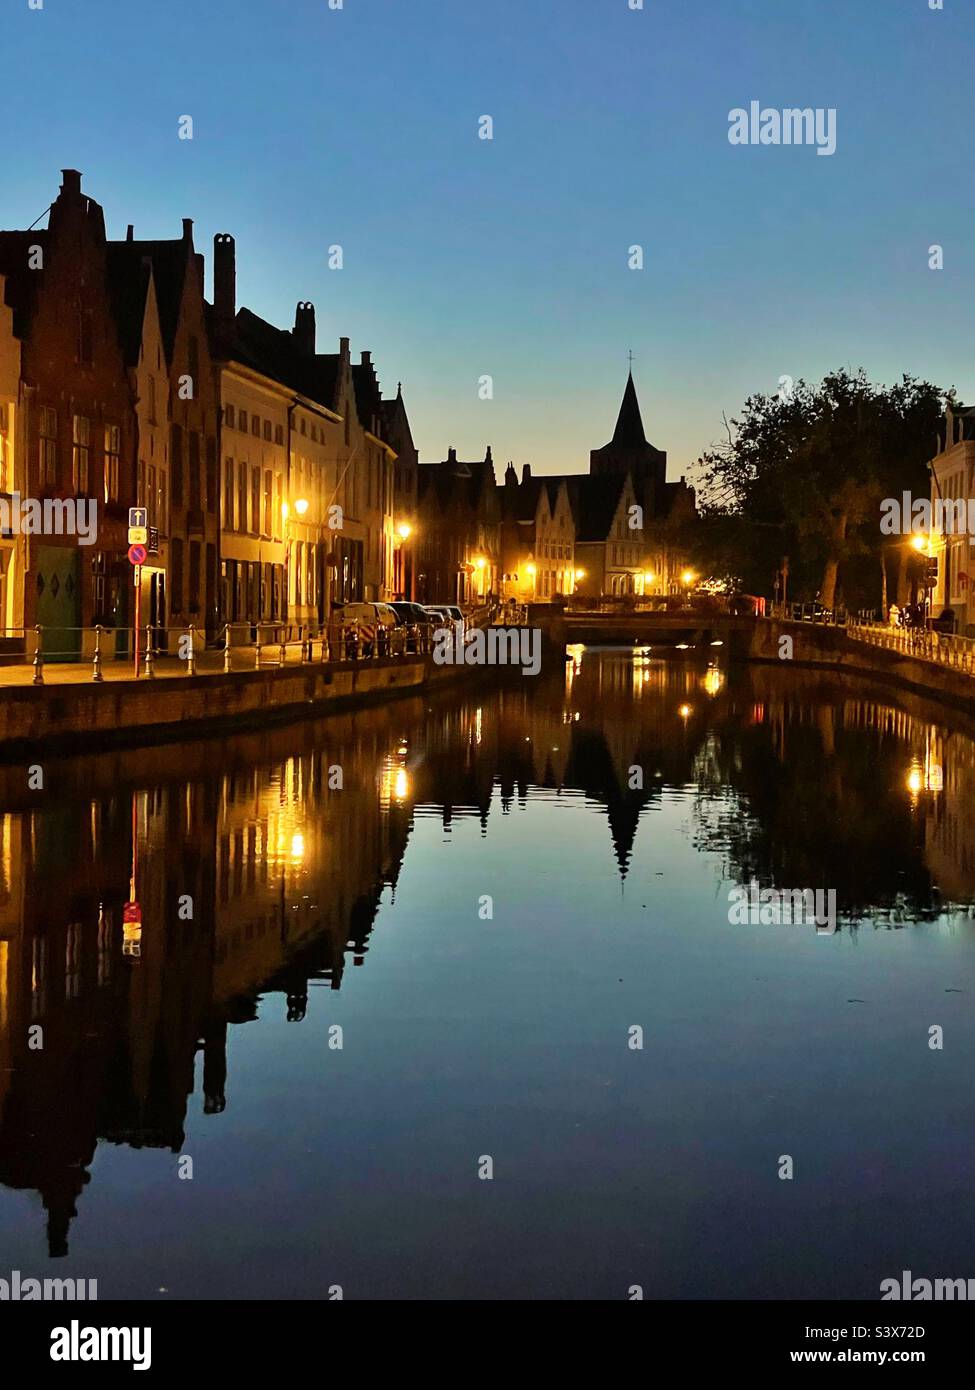 Evening reflections in the canal at Bruges, Belgium. Stock Photo